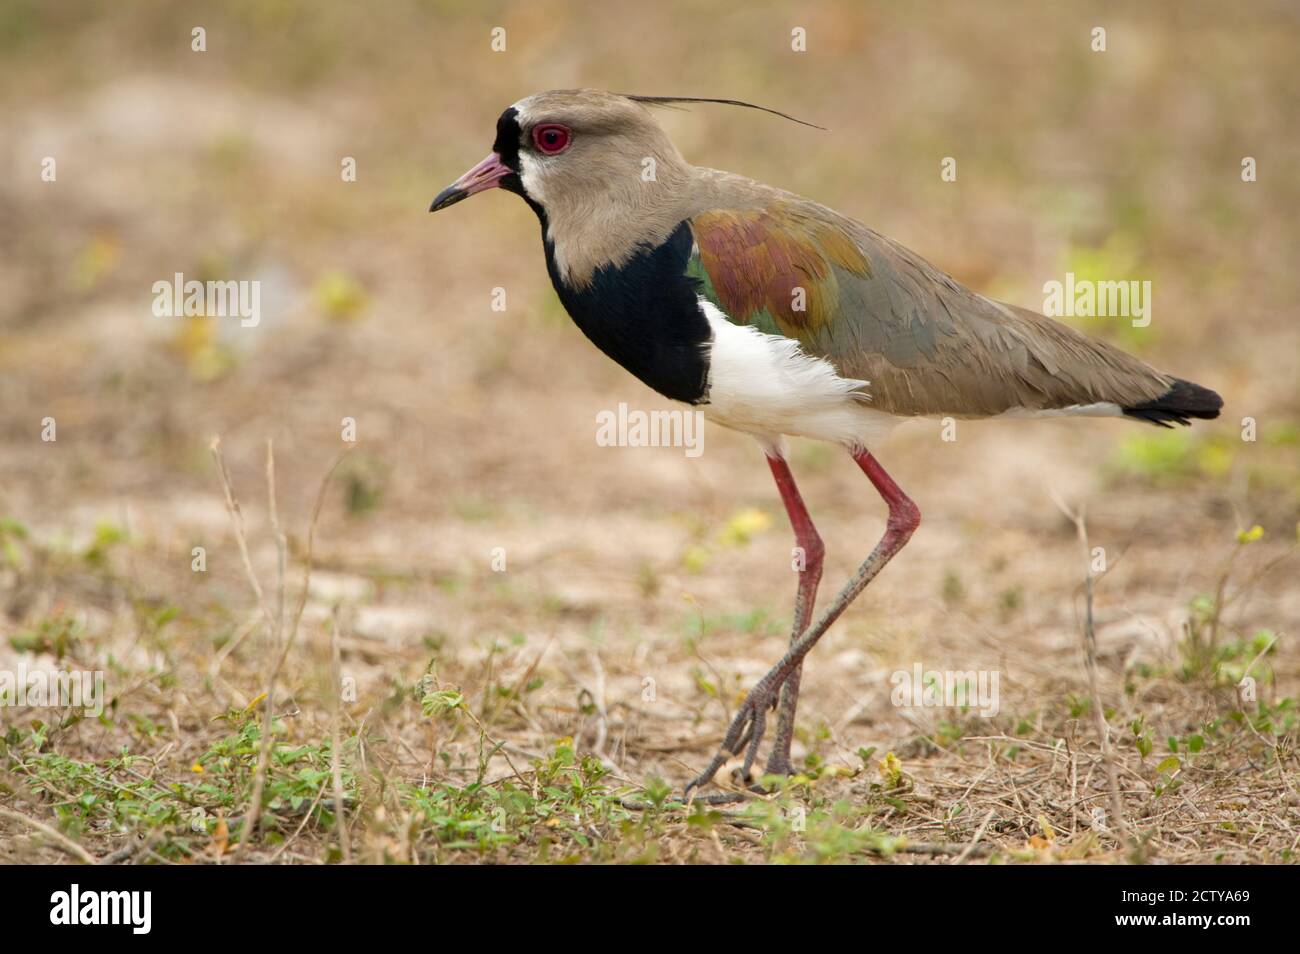 Close-up of a Southern lapwing (Vanellus chilensis), Three Brothers River, Meeting of the Waters State Park, Pantanal Wetlands, Brazil Stock Photo